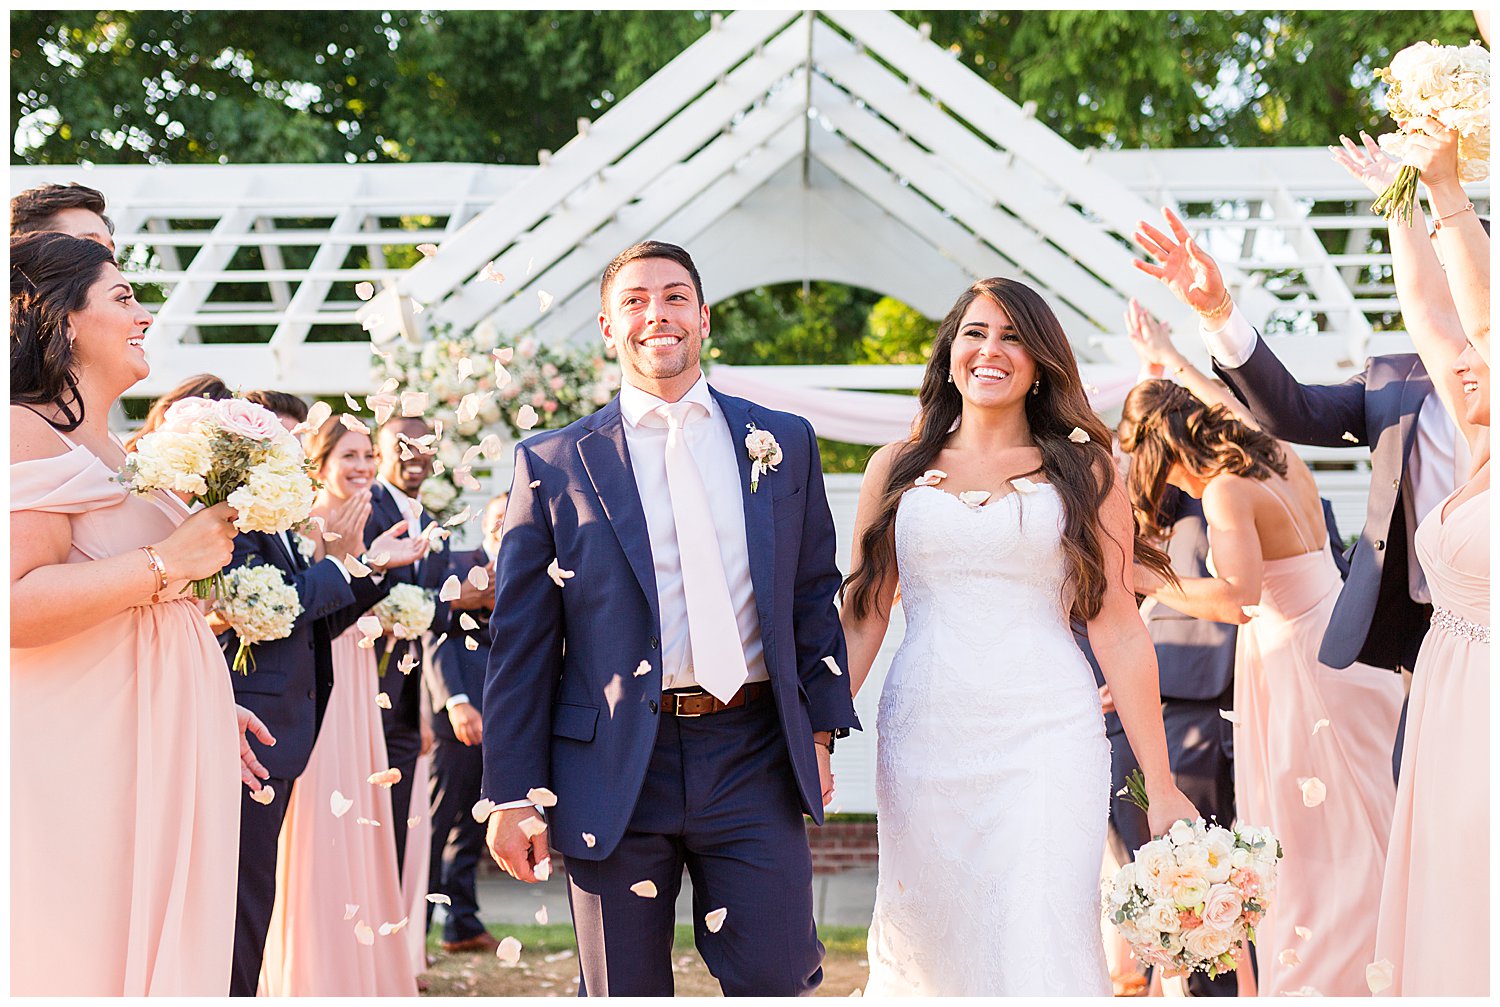 Bride and groom recessional